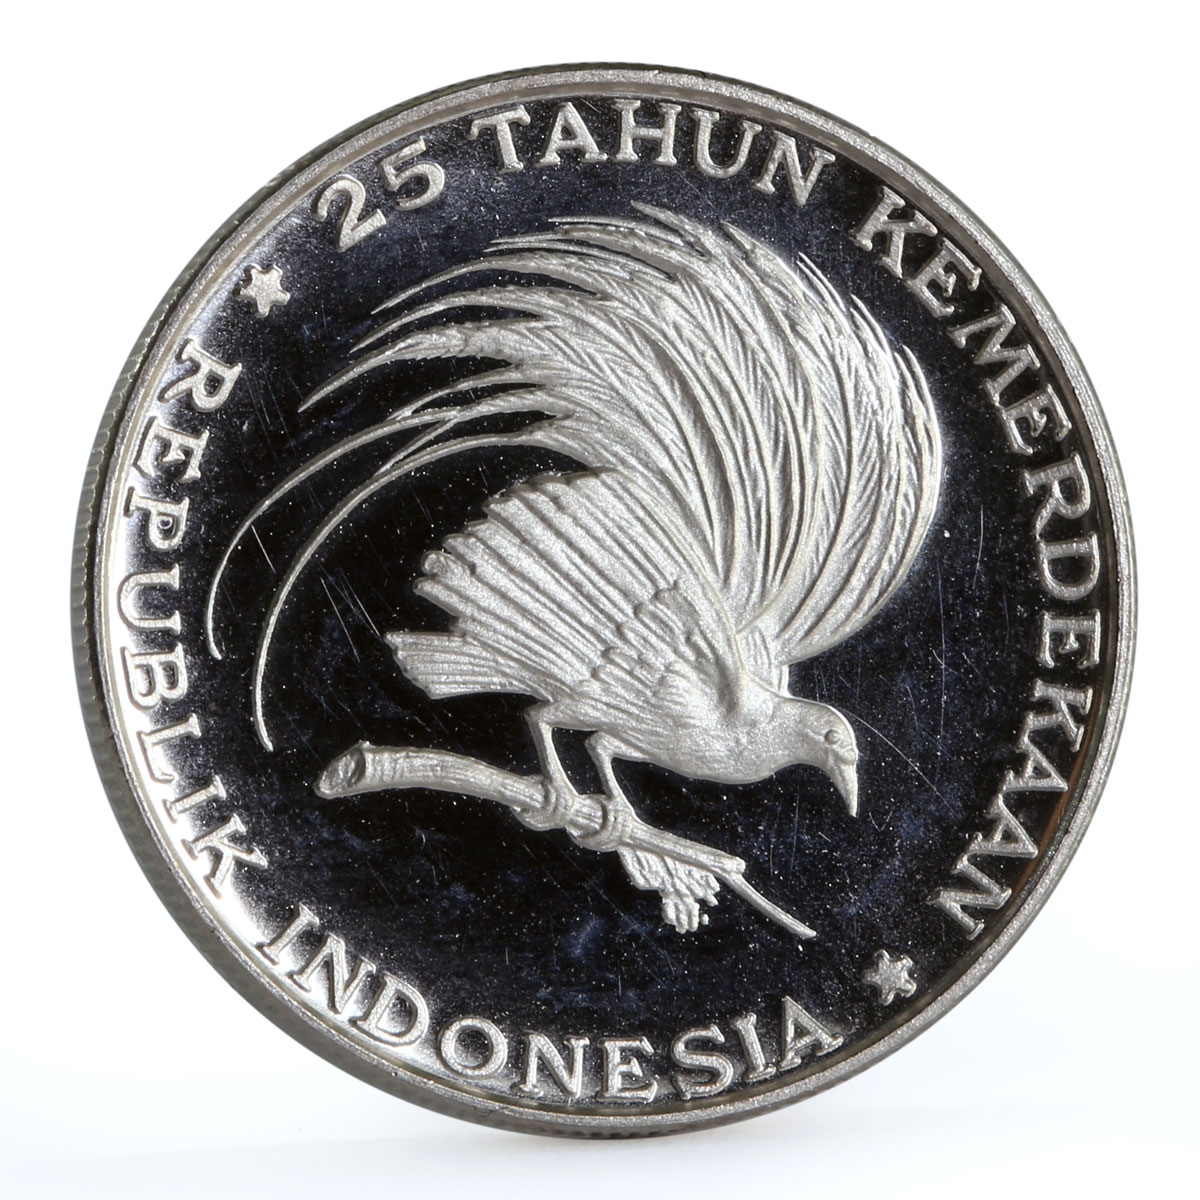 Indonesia 200 rupiah 25th Anniversary Independence Great Bird silver coin 1970